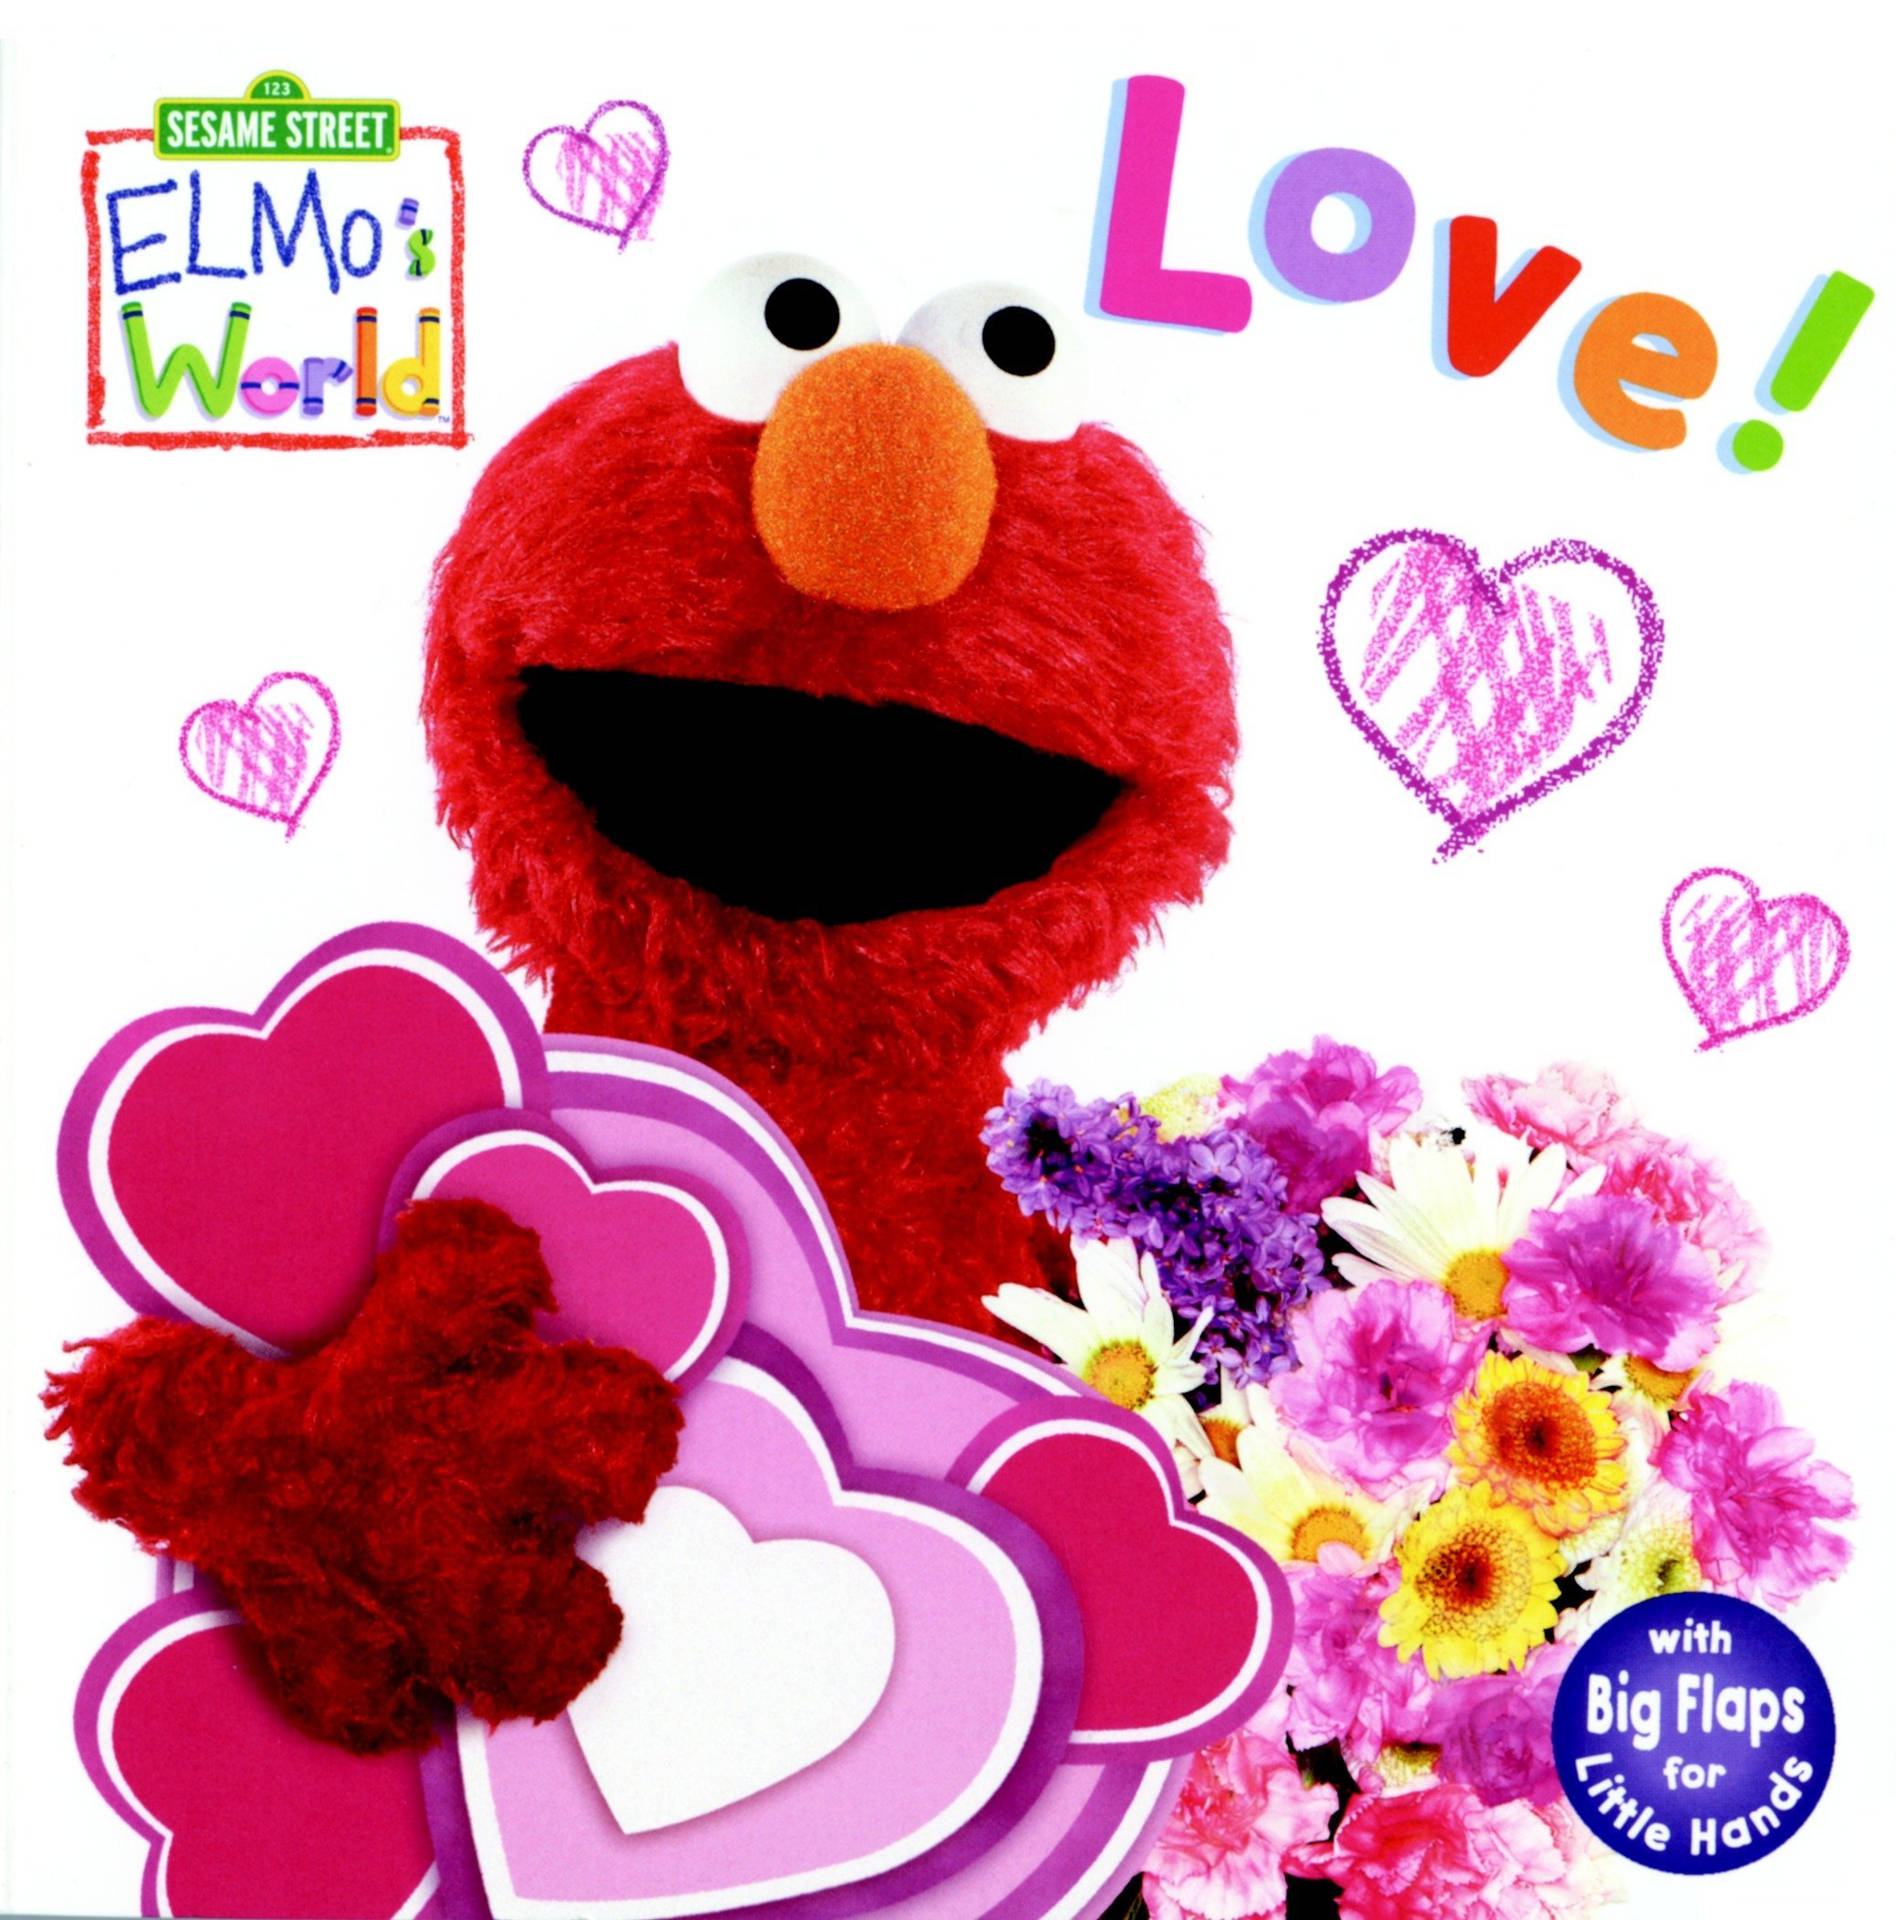 Elmo 2077X2103 Wallpaper and Background Image